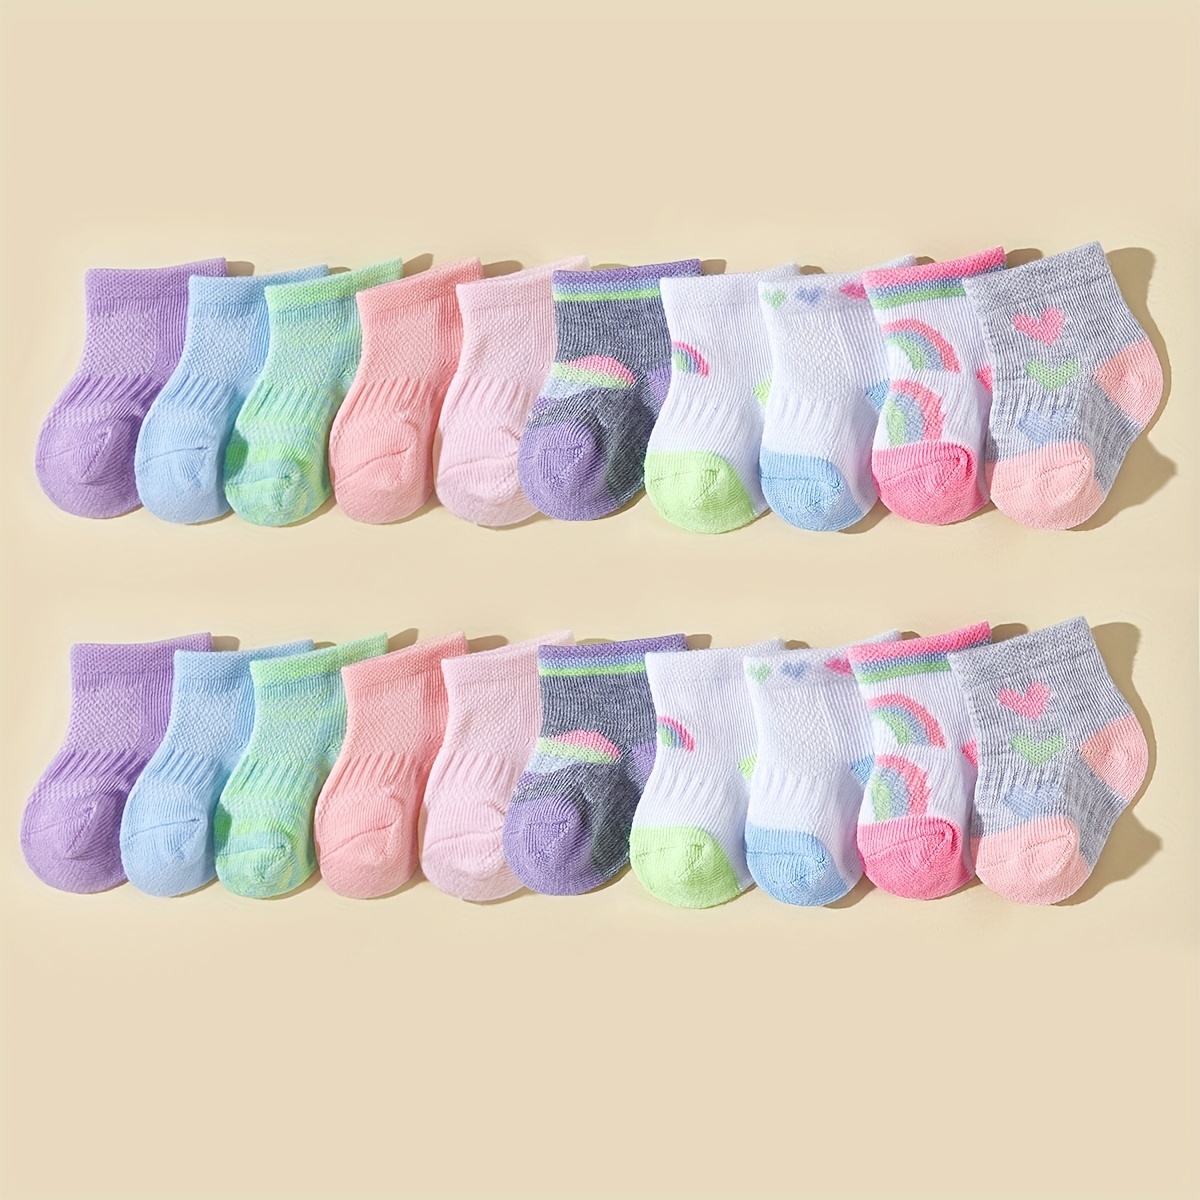 10/20 Pairs Of Baby Girl's Colorful Socks, Comfy Breathable Soft Socks For Babies Wearing